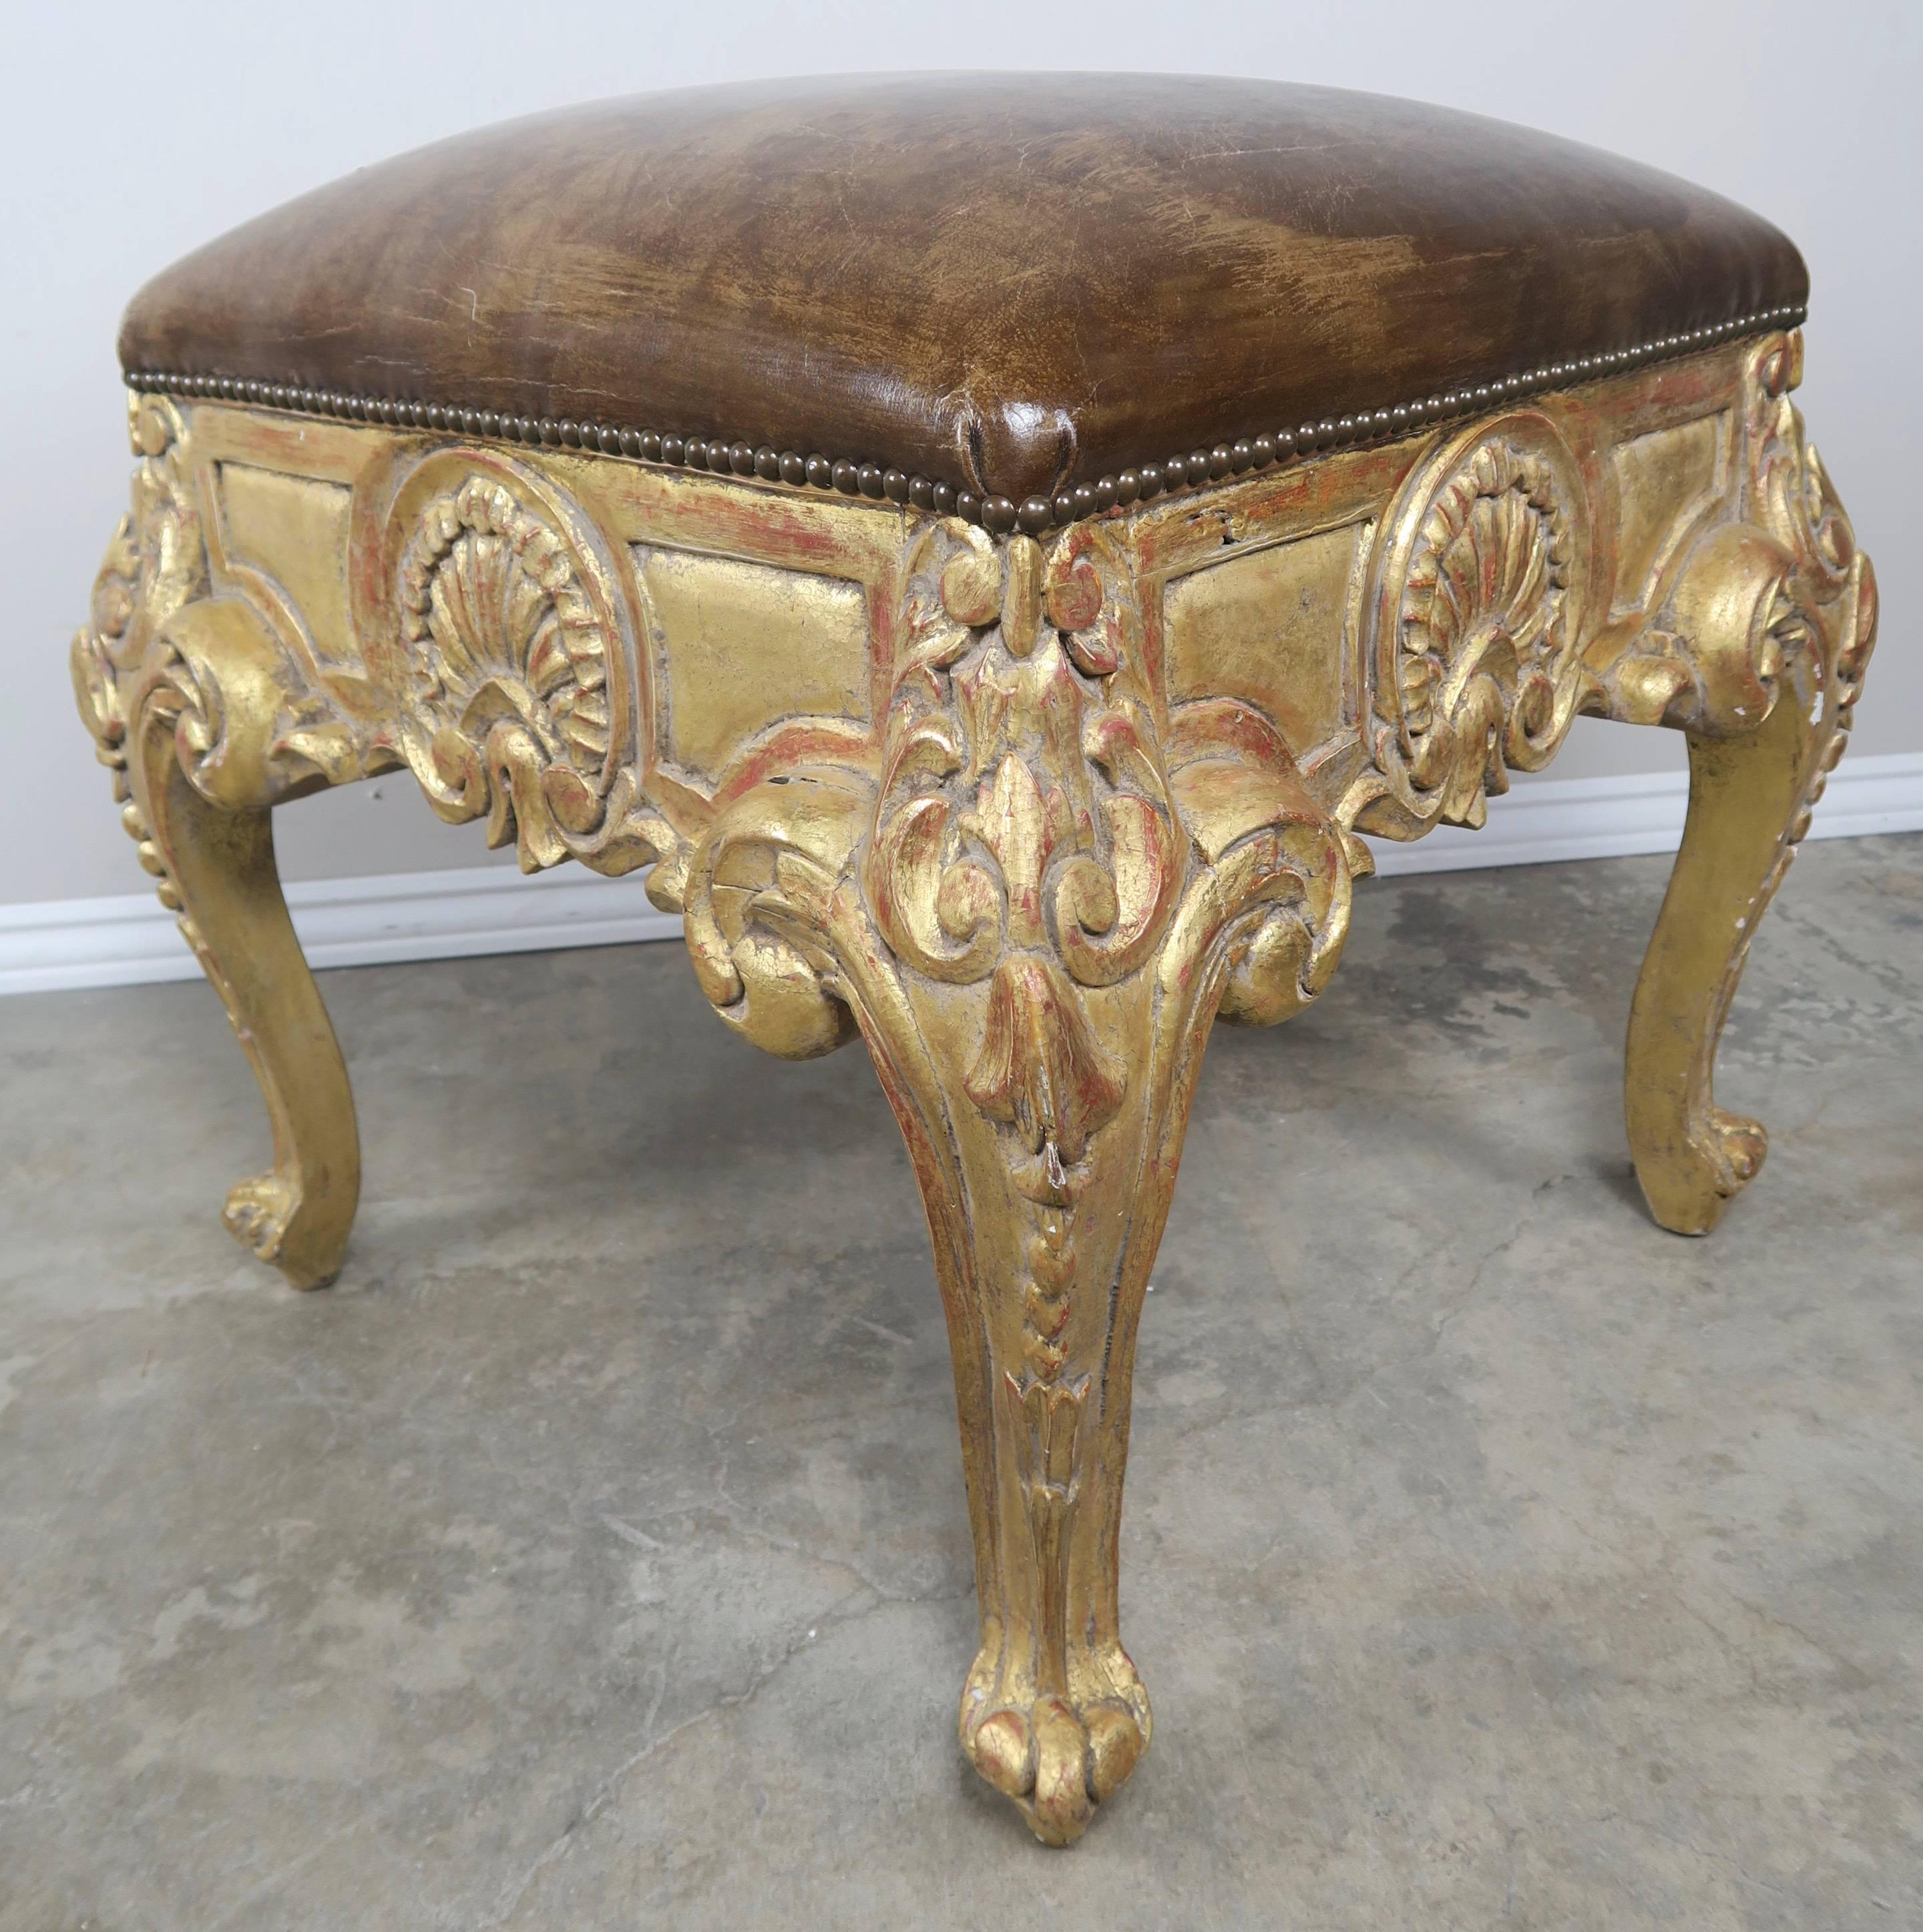 A pair of French 22-karat giltwood carved Louis XV style benches upholstered in beautiful distressed leather with antique brass nailhead trim detail. Carved shell motif on all four sides. The benches stand on cabriole legs that end in ram's head